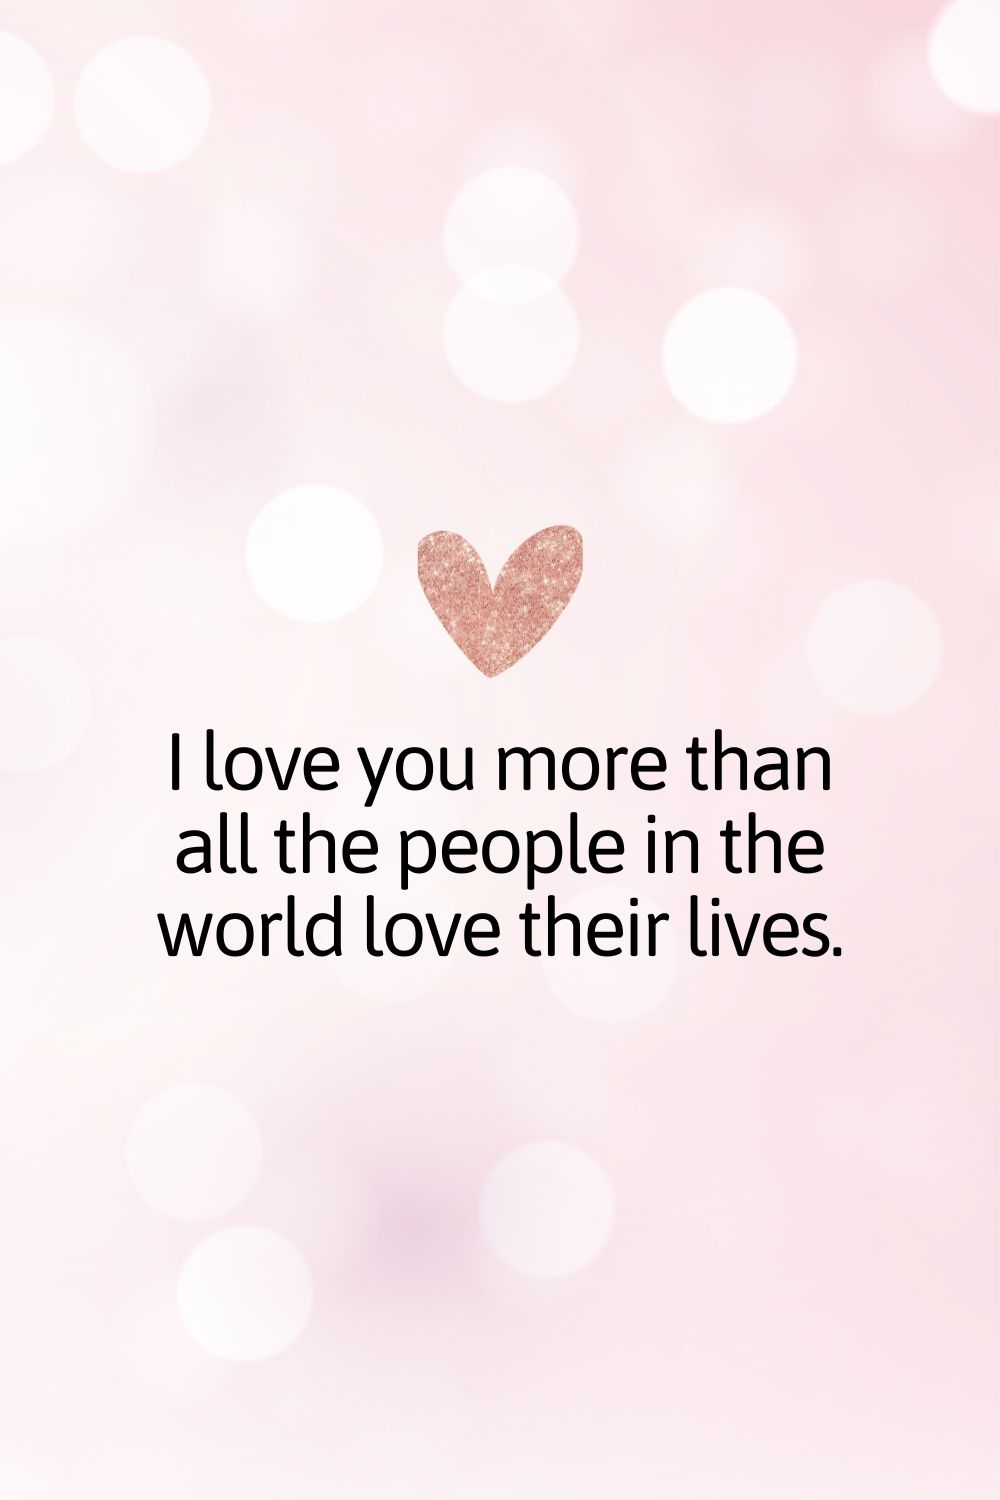 I love you more than all the people in the world love their lives